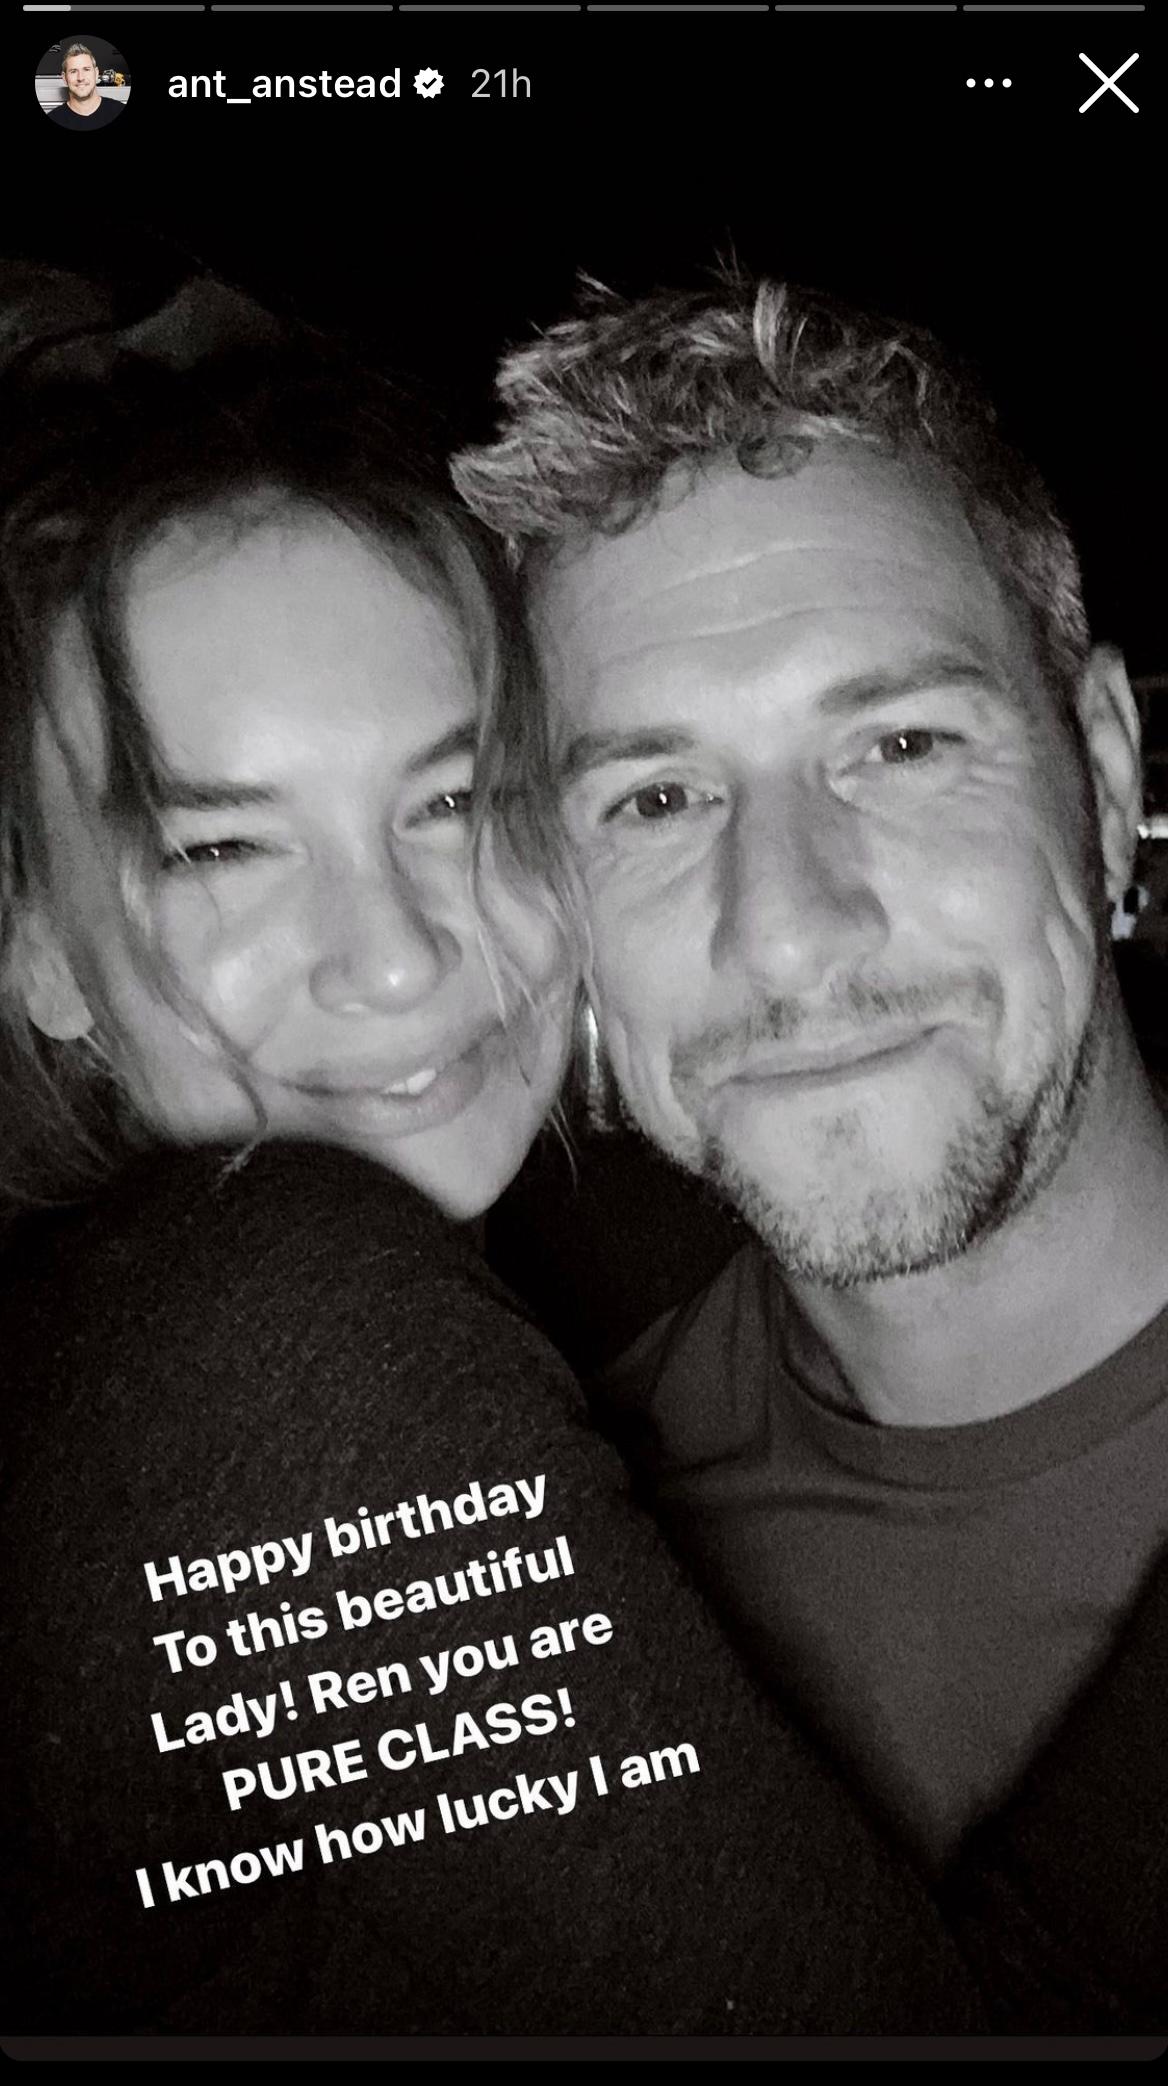 Ant Anstead's post on his Instagram story